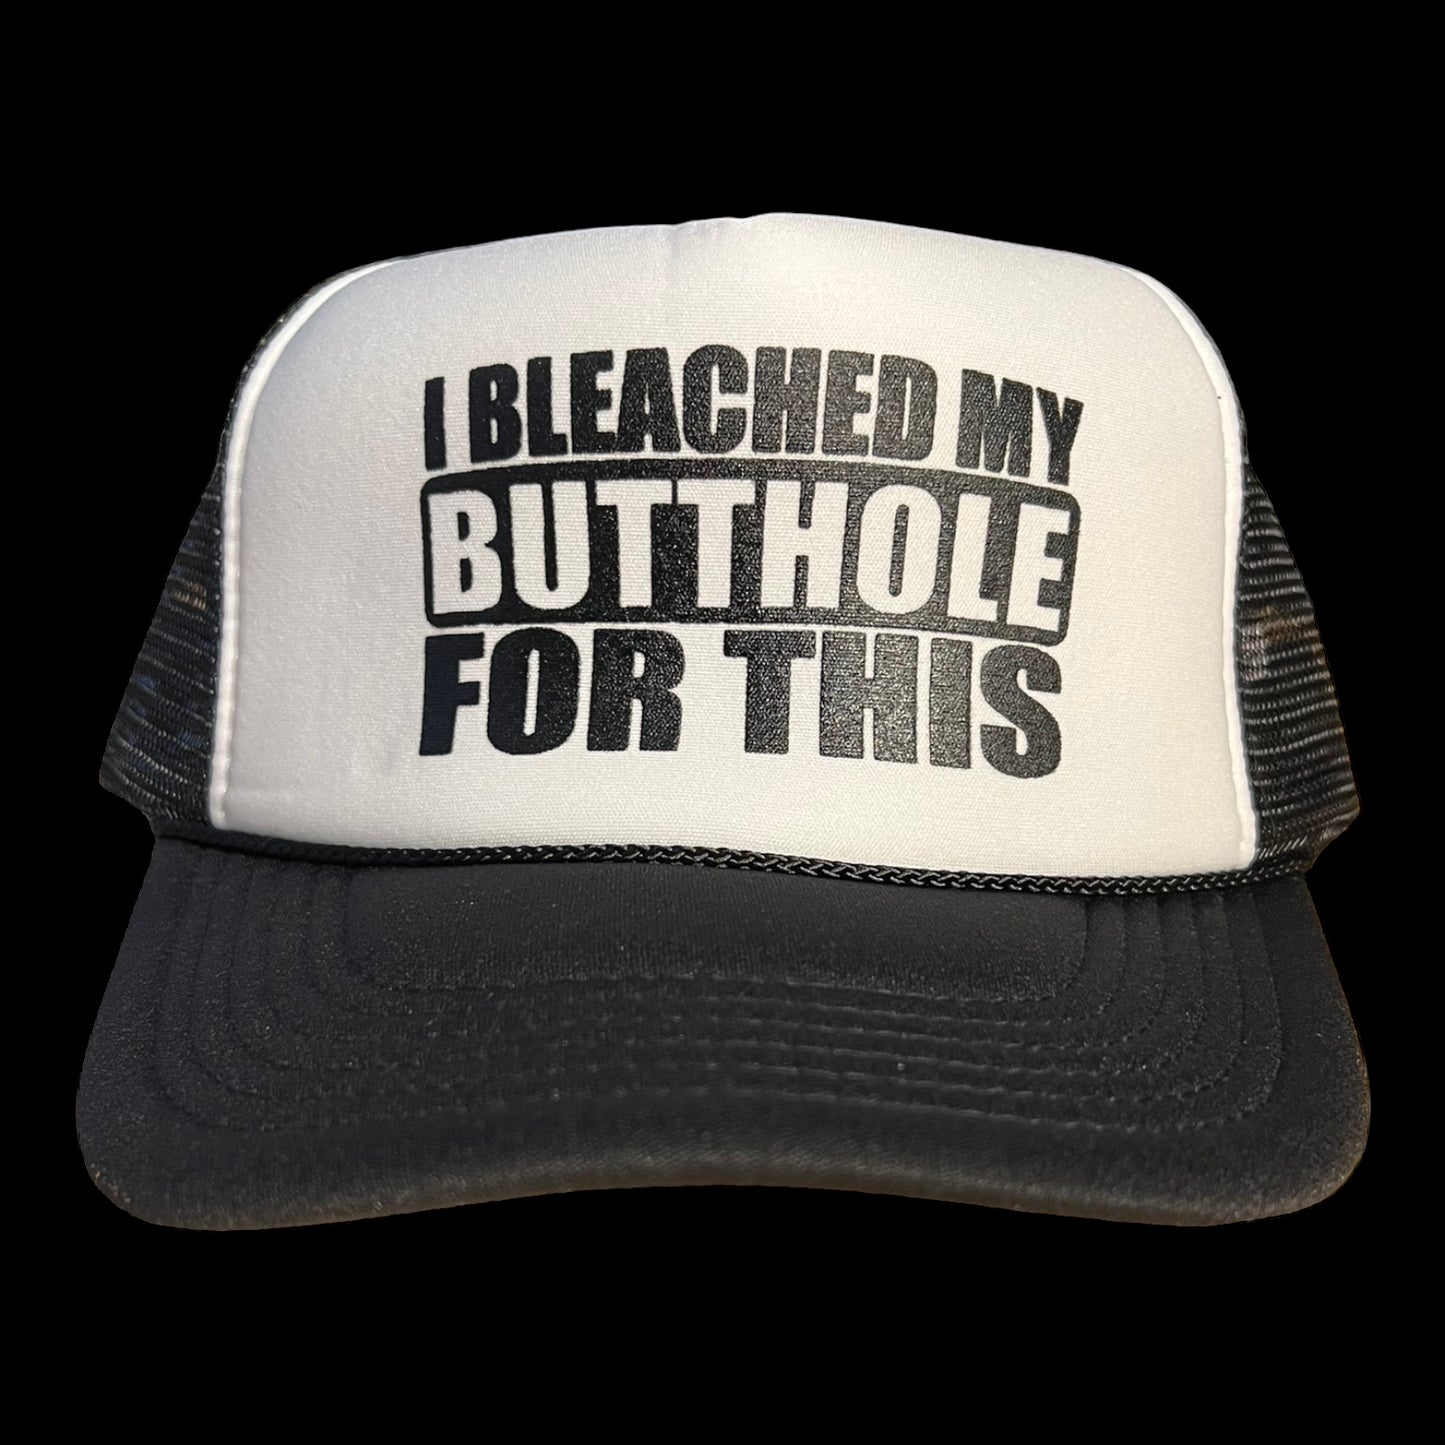 I Bleached My Butthole For This Trucker Hat Funny Trucker Hat Black/White